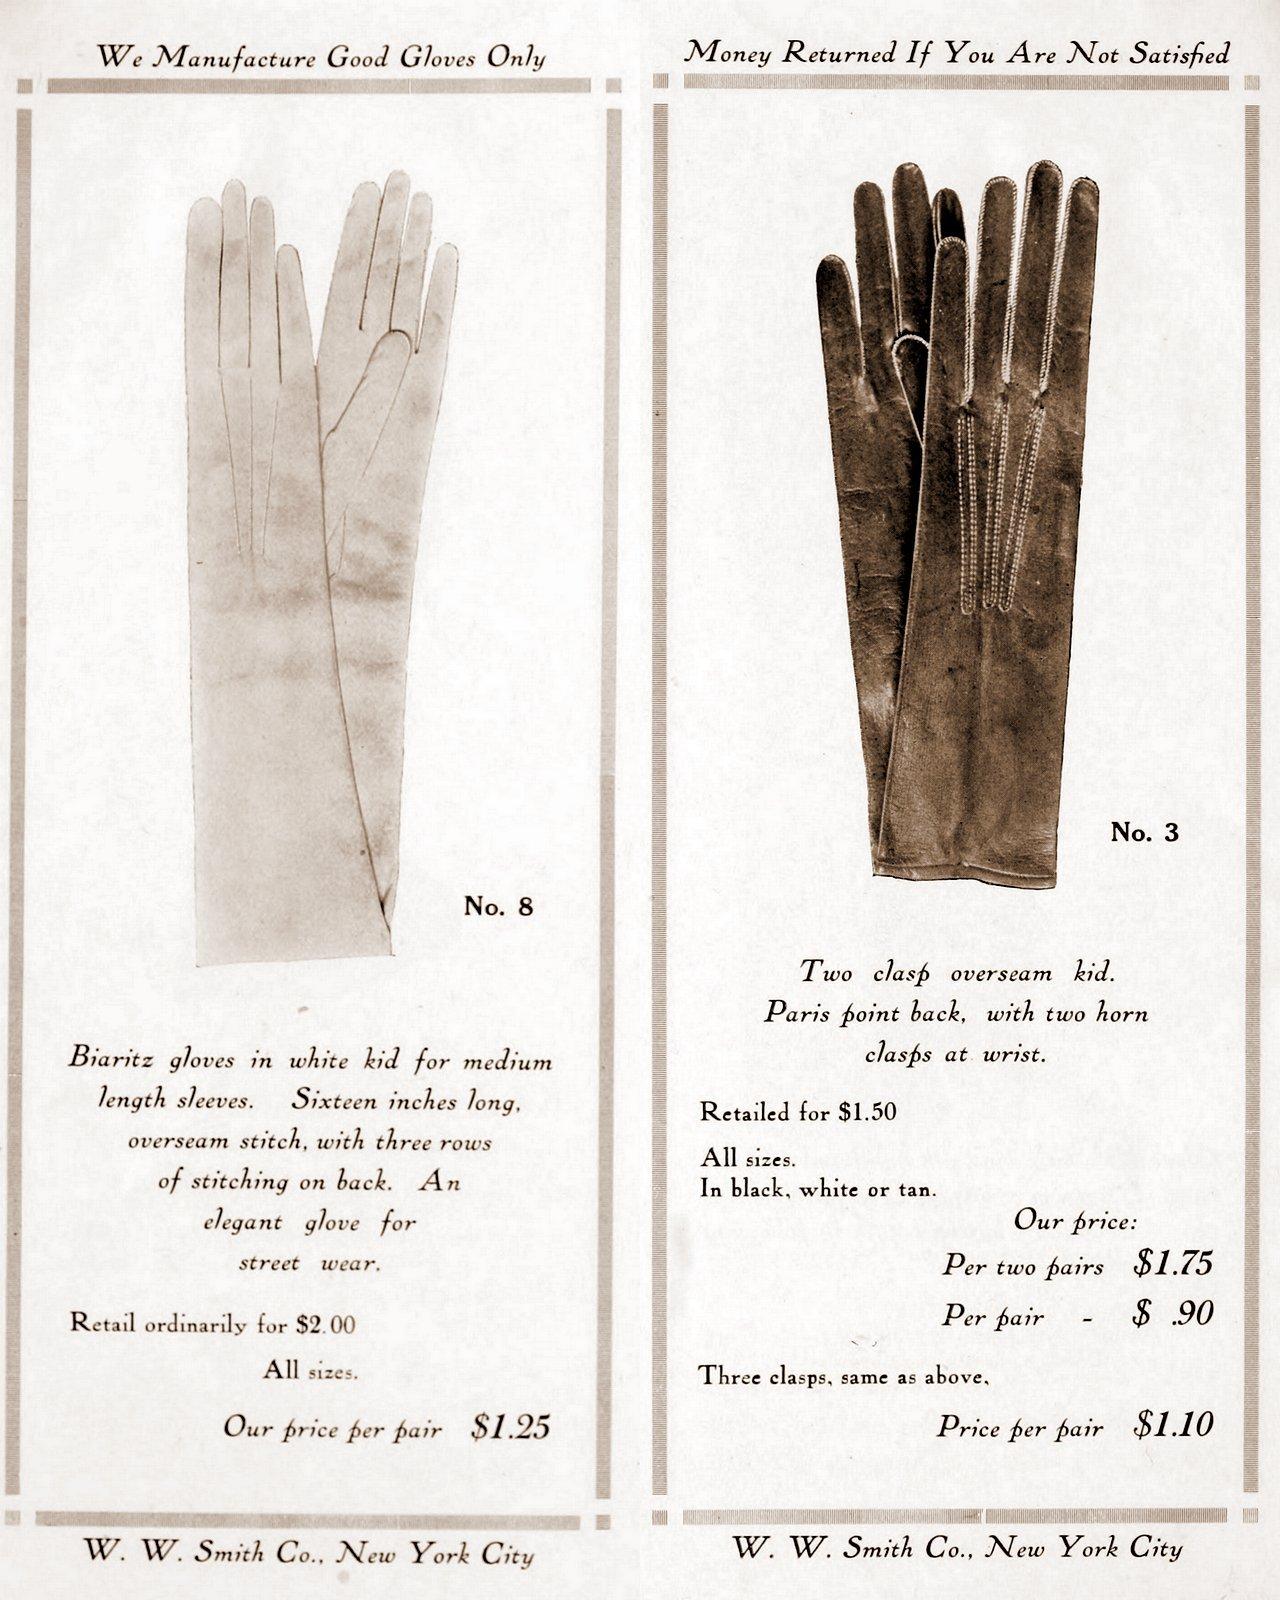 Antique gloves - styles for women from 1912 (4)